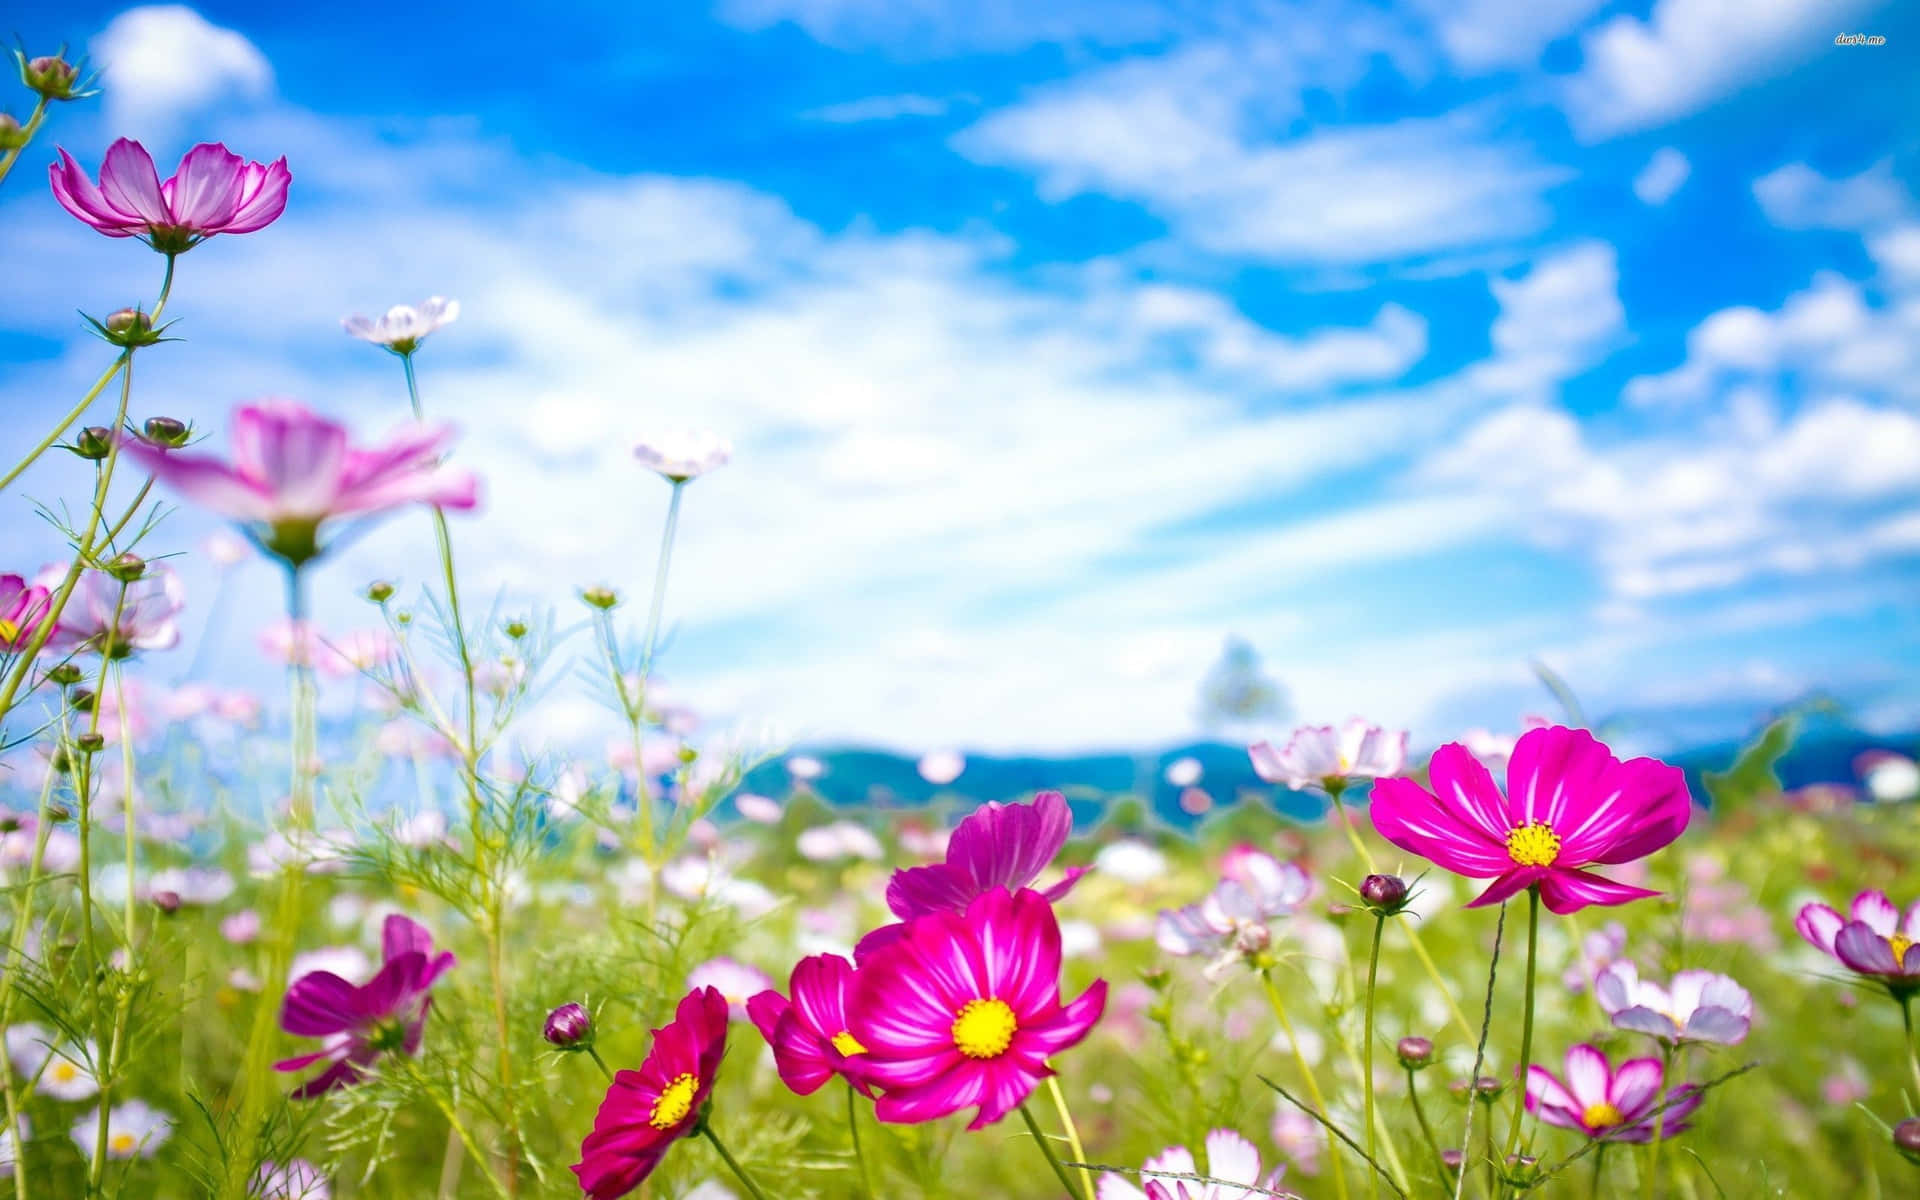 A Field Of Pink Flowers With Blue Sky And Clouds